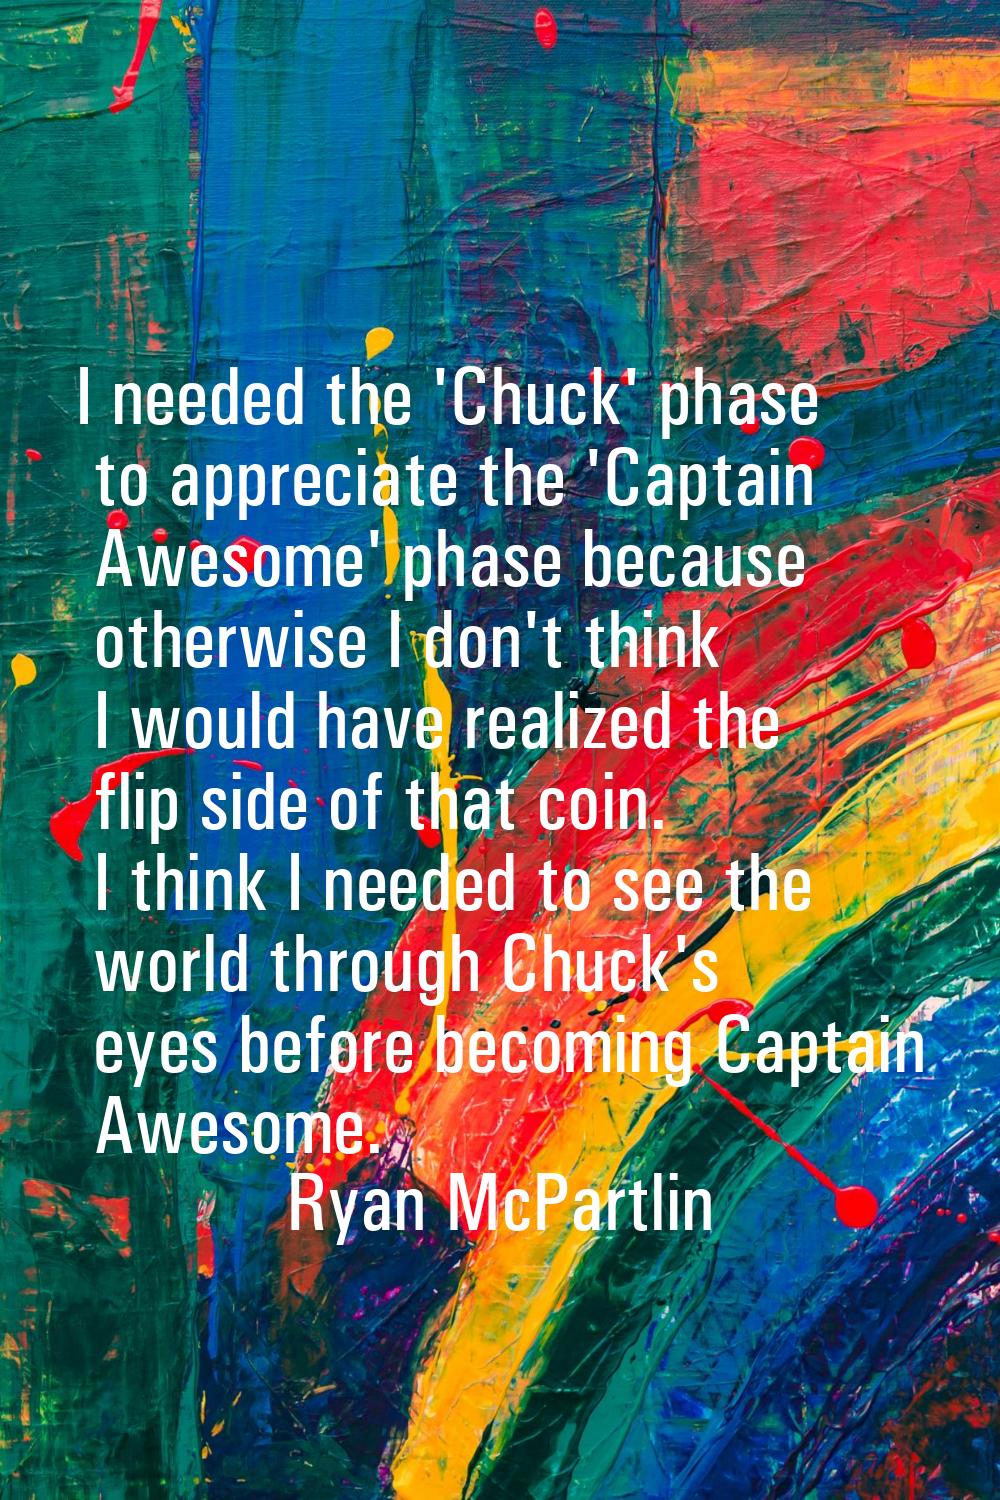 I needed the 'Chuck' phase to appreciate the 'Captain Awesome' phase because otherwise I don't thin